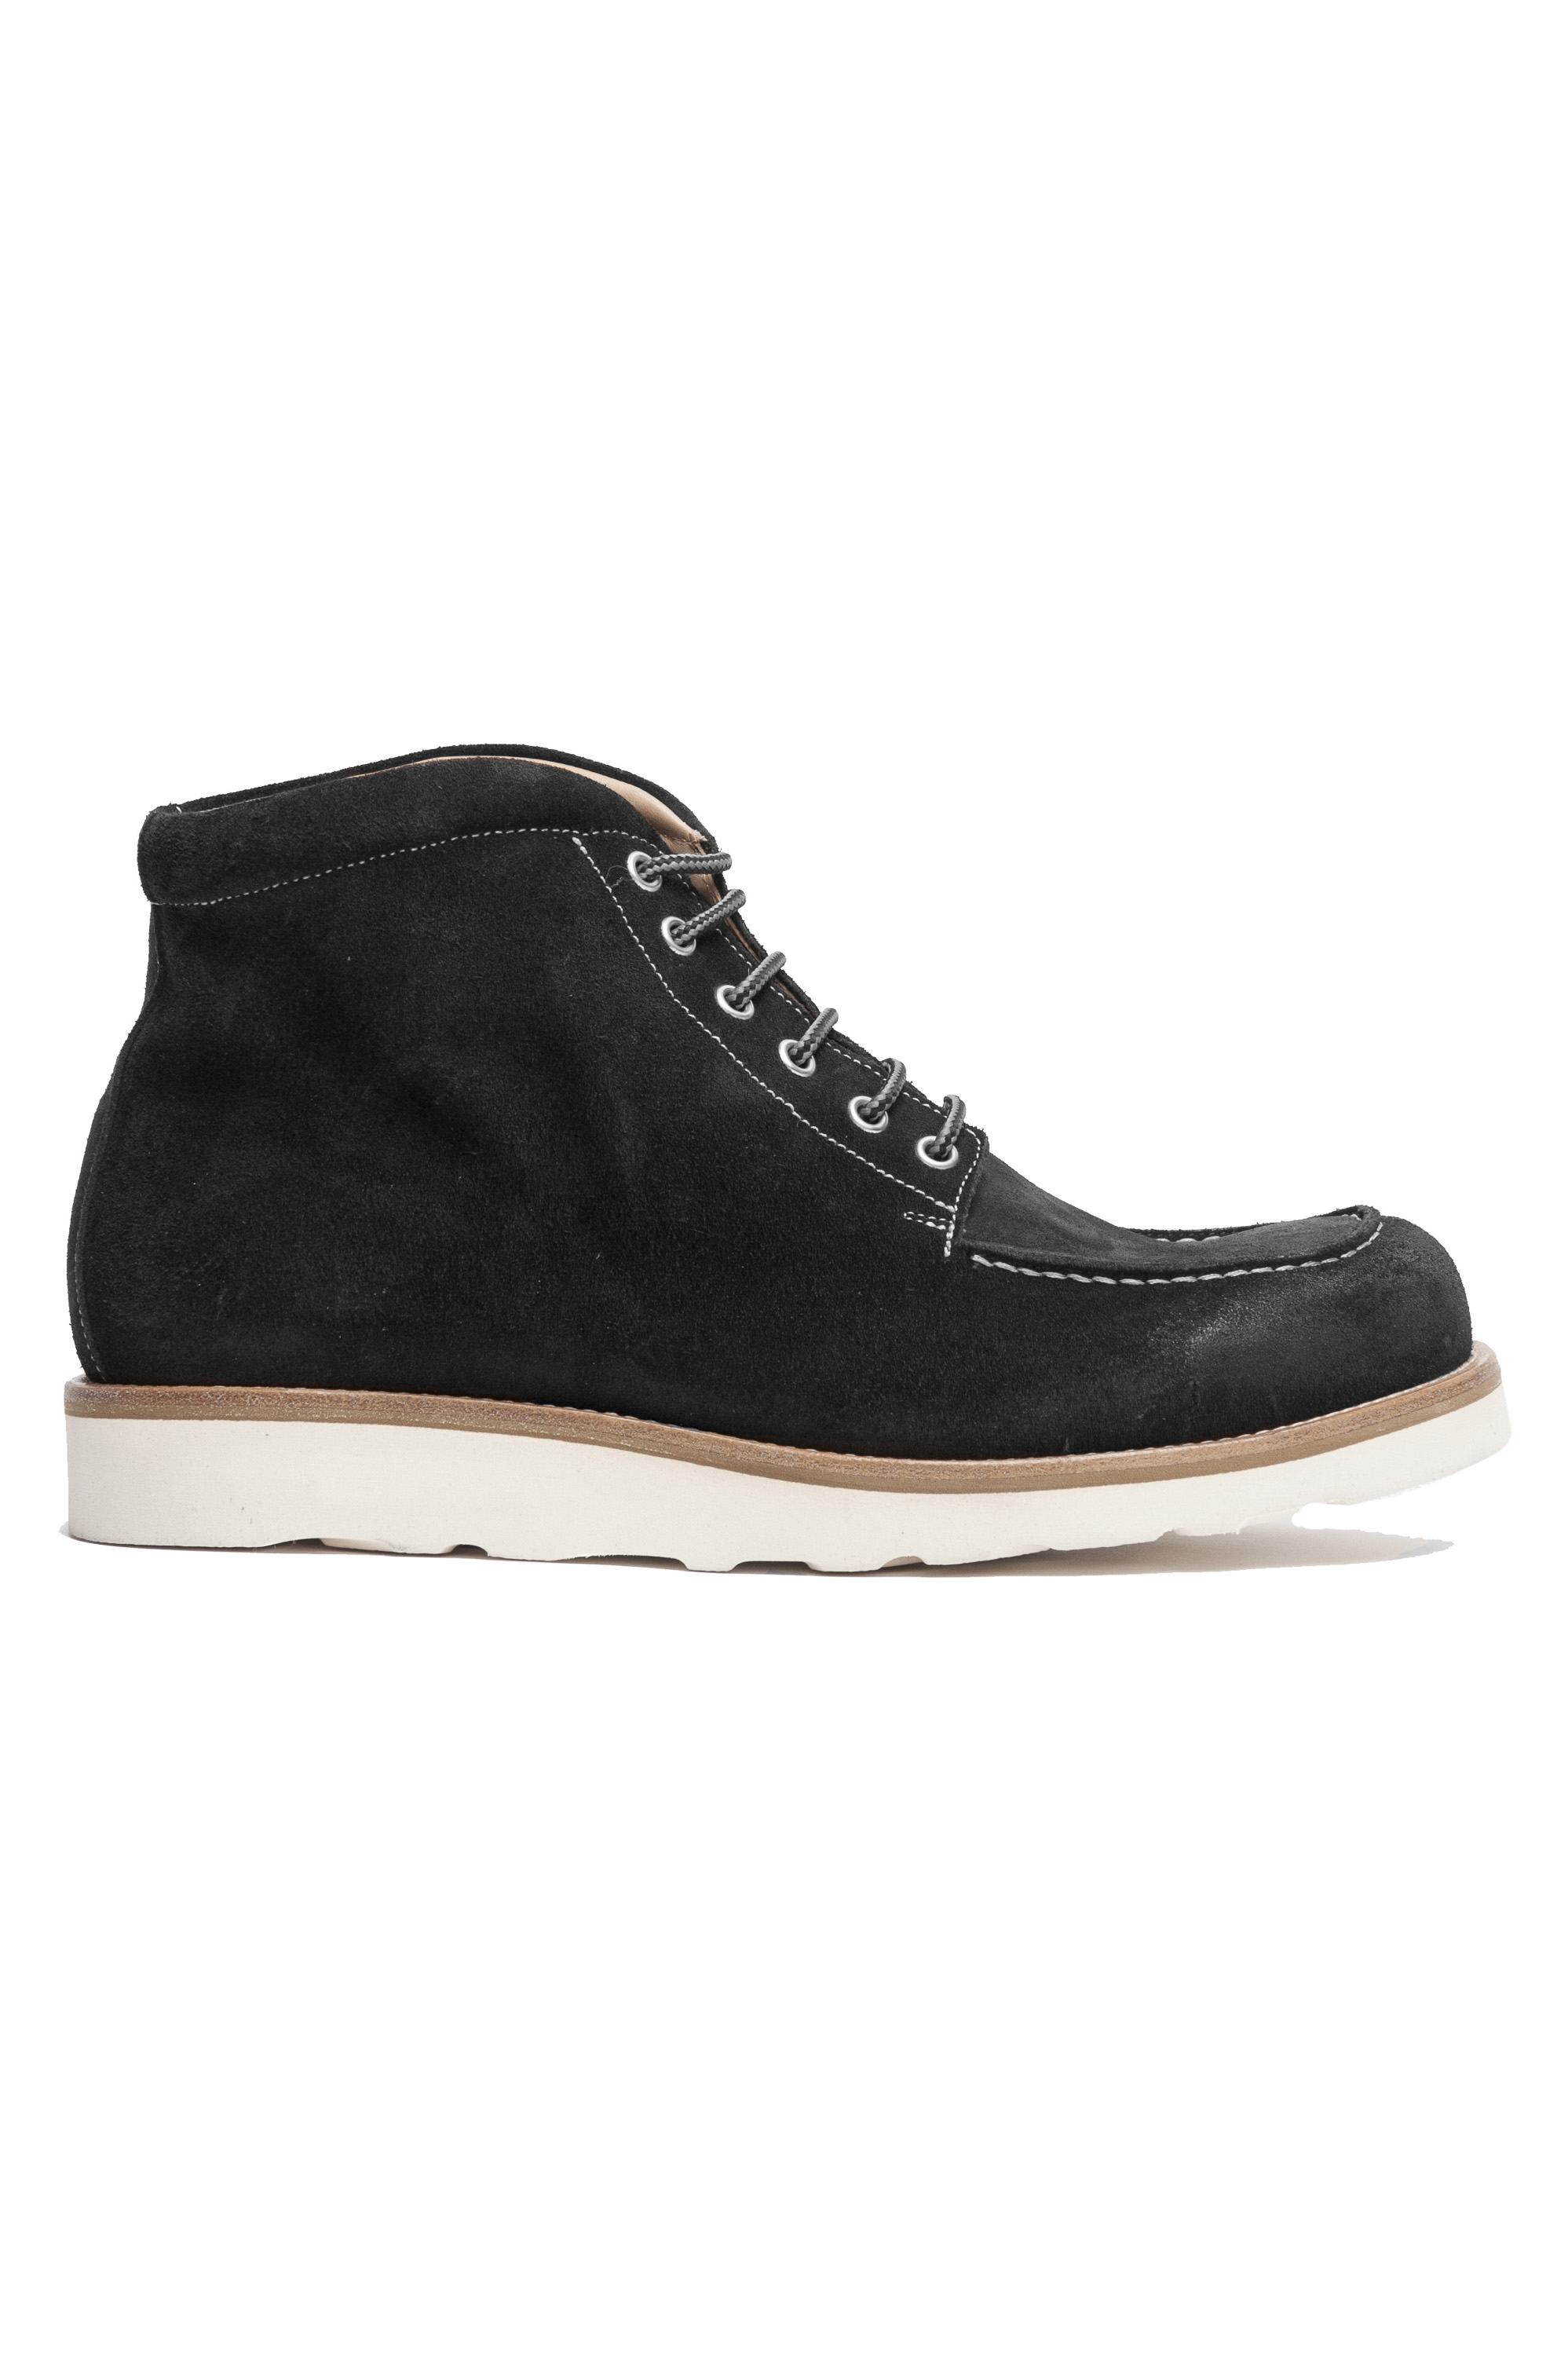 SBU 01918_19AW High top work boots in black suede leather 01